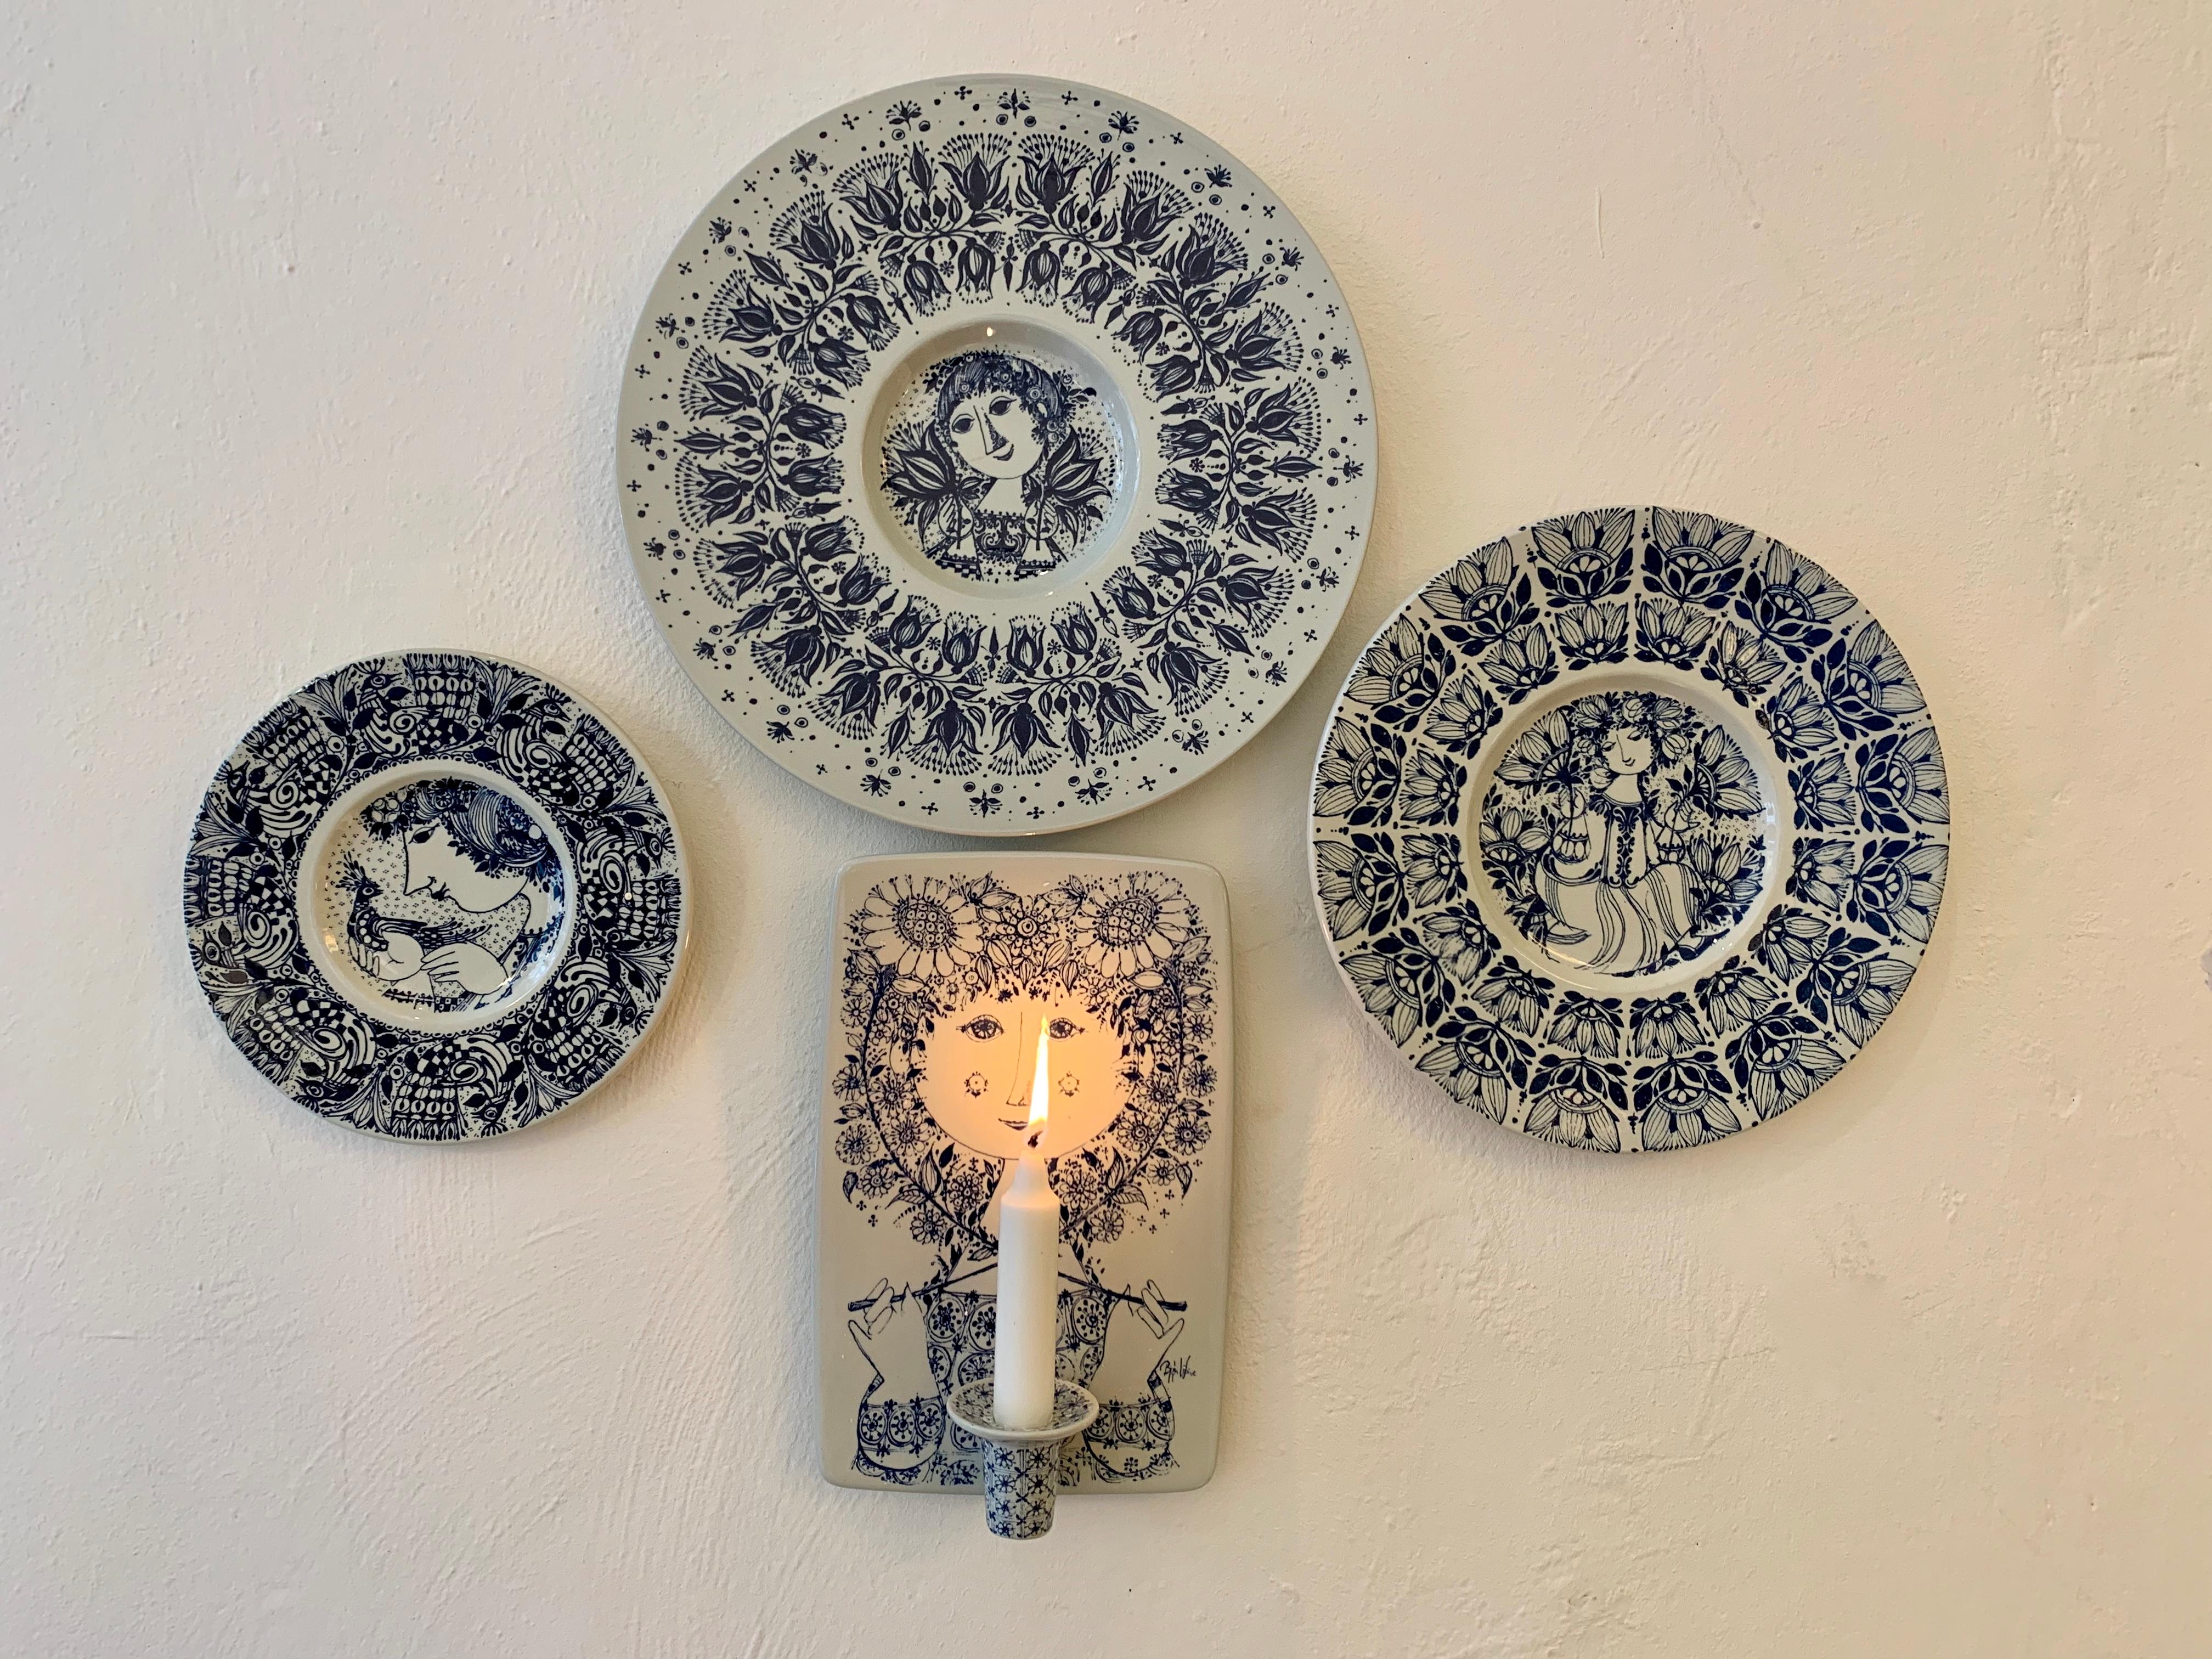 Bjørn Wiinblad (1918-2006) installation of 4 ceramic wall hangings, consisting of one candle holder wall plaque with one light arm + 3 different sized wall plates 
Made by Danish ceramist company Nymolle from the 1960's / early 70's. 

All pieces